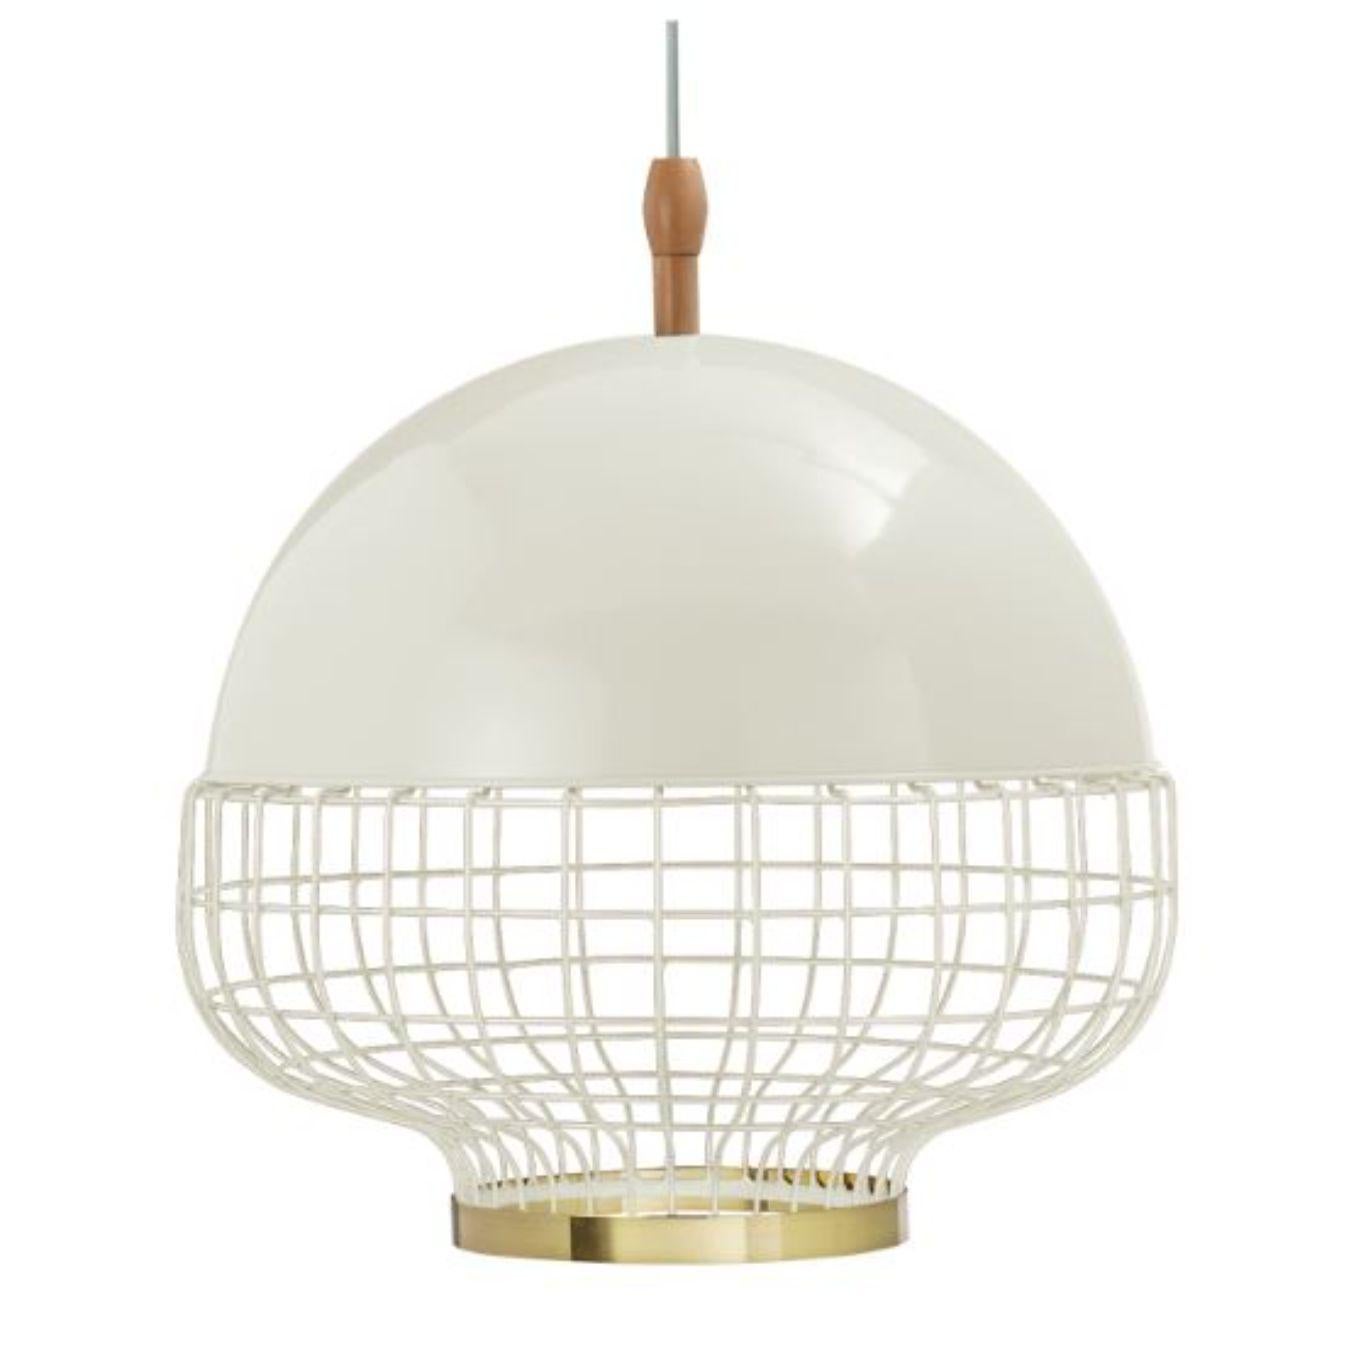 Salmon Magnolia I Suspension Lamp with Copper Ring by Dooq For Sale 2